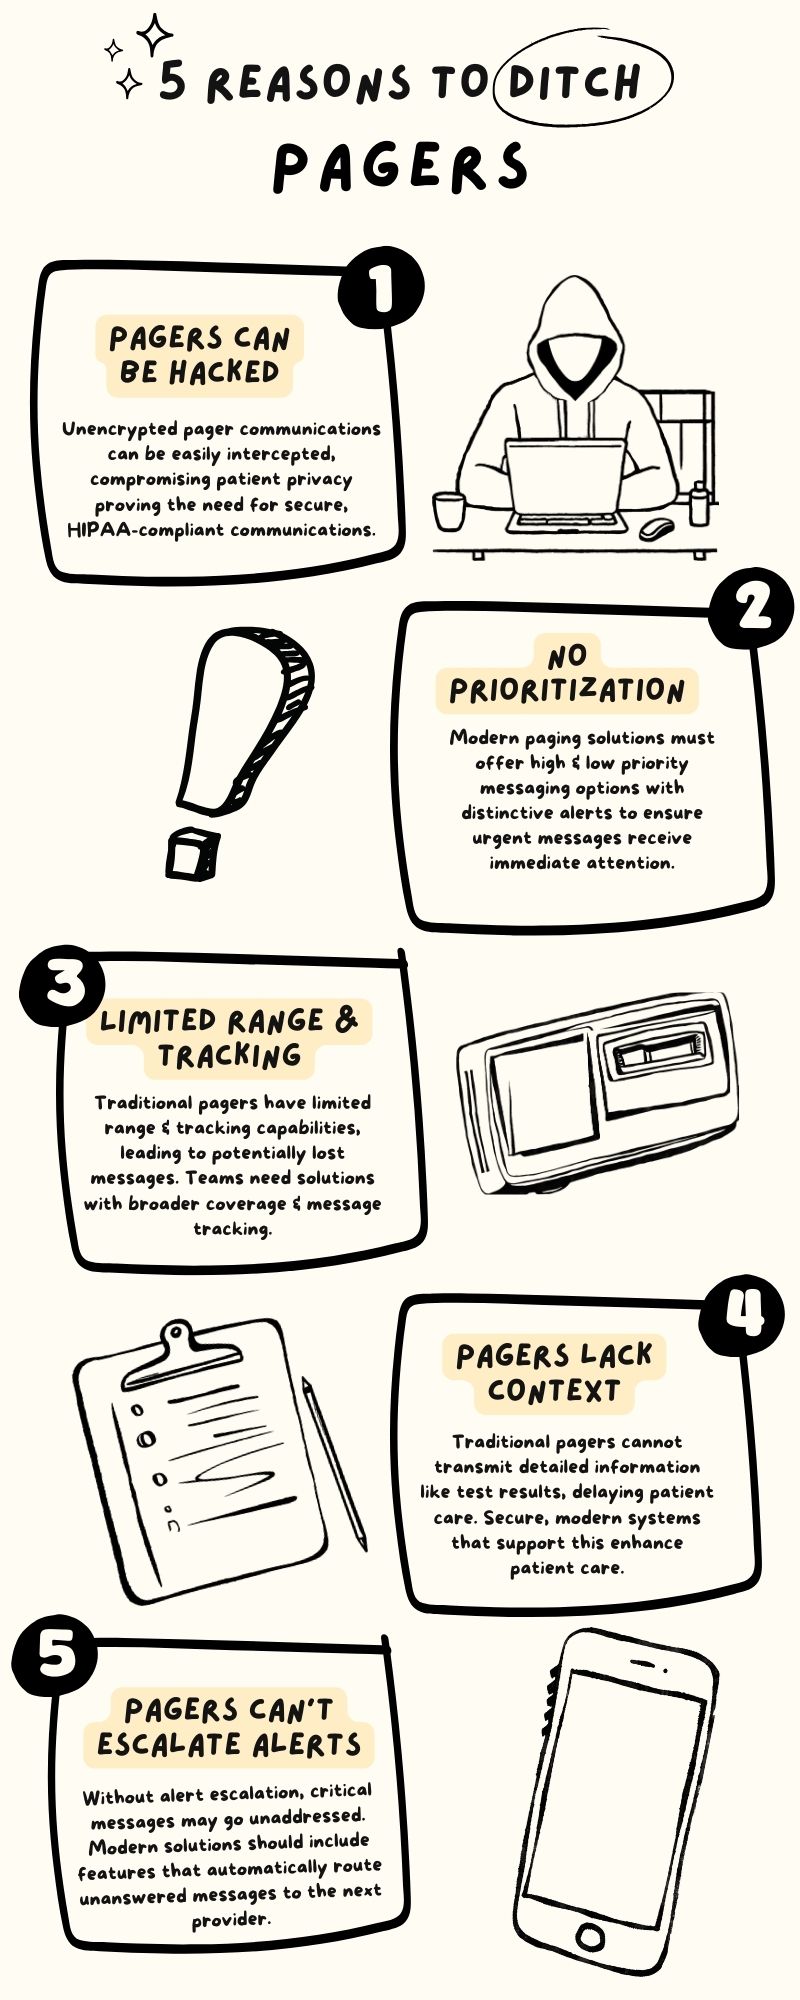 5 Reasons to Ditch Pagers and Invest in Clinical Communications Tools Infographic:  1. Pagers can be hacked: Unencrypted pagers communications can be easily intercepted, compromising patient privacy proving the need for secure, HIPAA-compliant communications. 2. No prioritization: Modern paging solutions must offer high and low priority messaging options with distinctive alerts to ensure urgent messages receive immediate attention. 3. Limited range and tracking: Traditional pagers have limited range and tracking capabilities, leading to potentially lost messages. Teams need solutions with broader coverage and message tracking. 4. Pagers lack context: Traditional pagers cannot transmit detailed information like test results, delaying patient care. Secure, modern systems that support this enhance patient care. 5. Pagers can't escalate alerts: Without alert escalation, critical messages may go unaddressed. Modern solutions should include features that automatically route unanswered messages to the next provider.